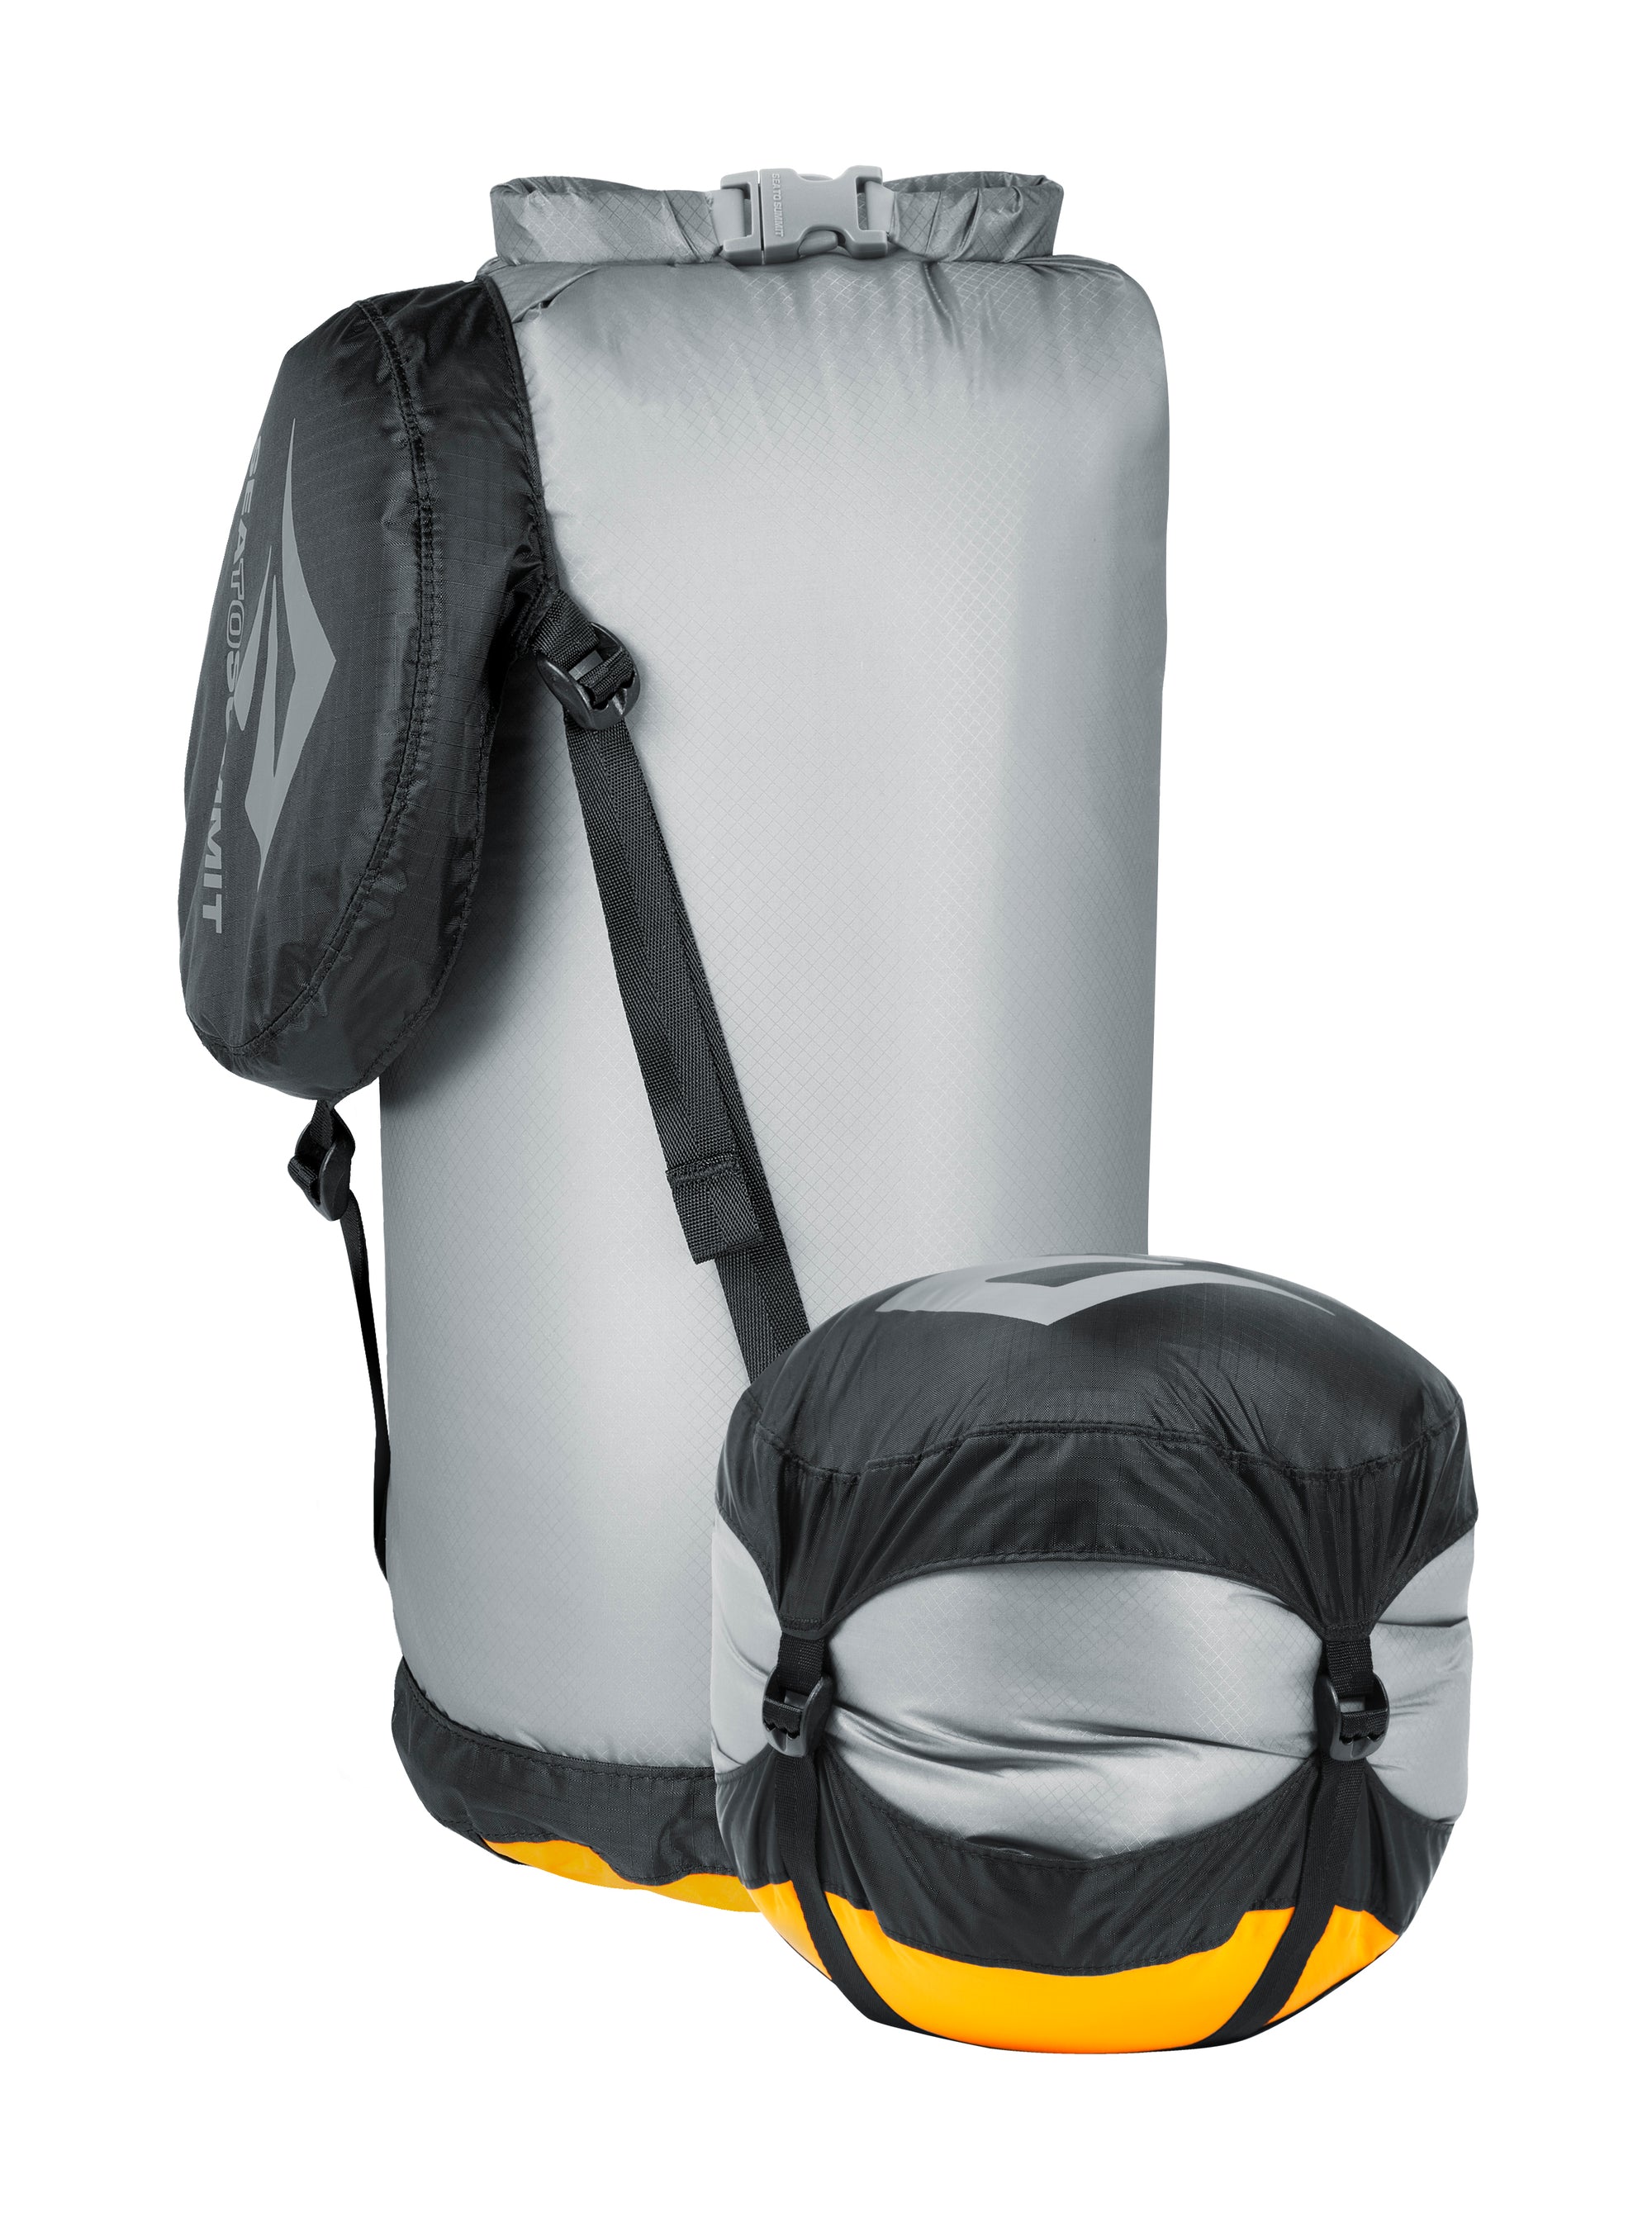 Ultra-Sil Compression eVent Dry Sack 14 L